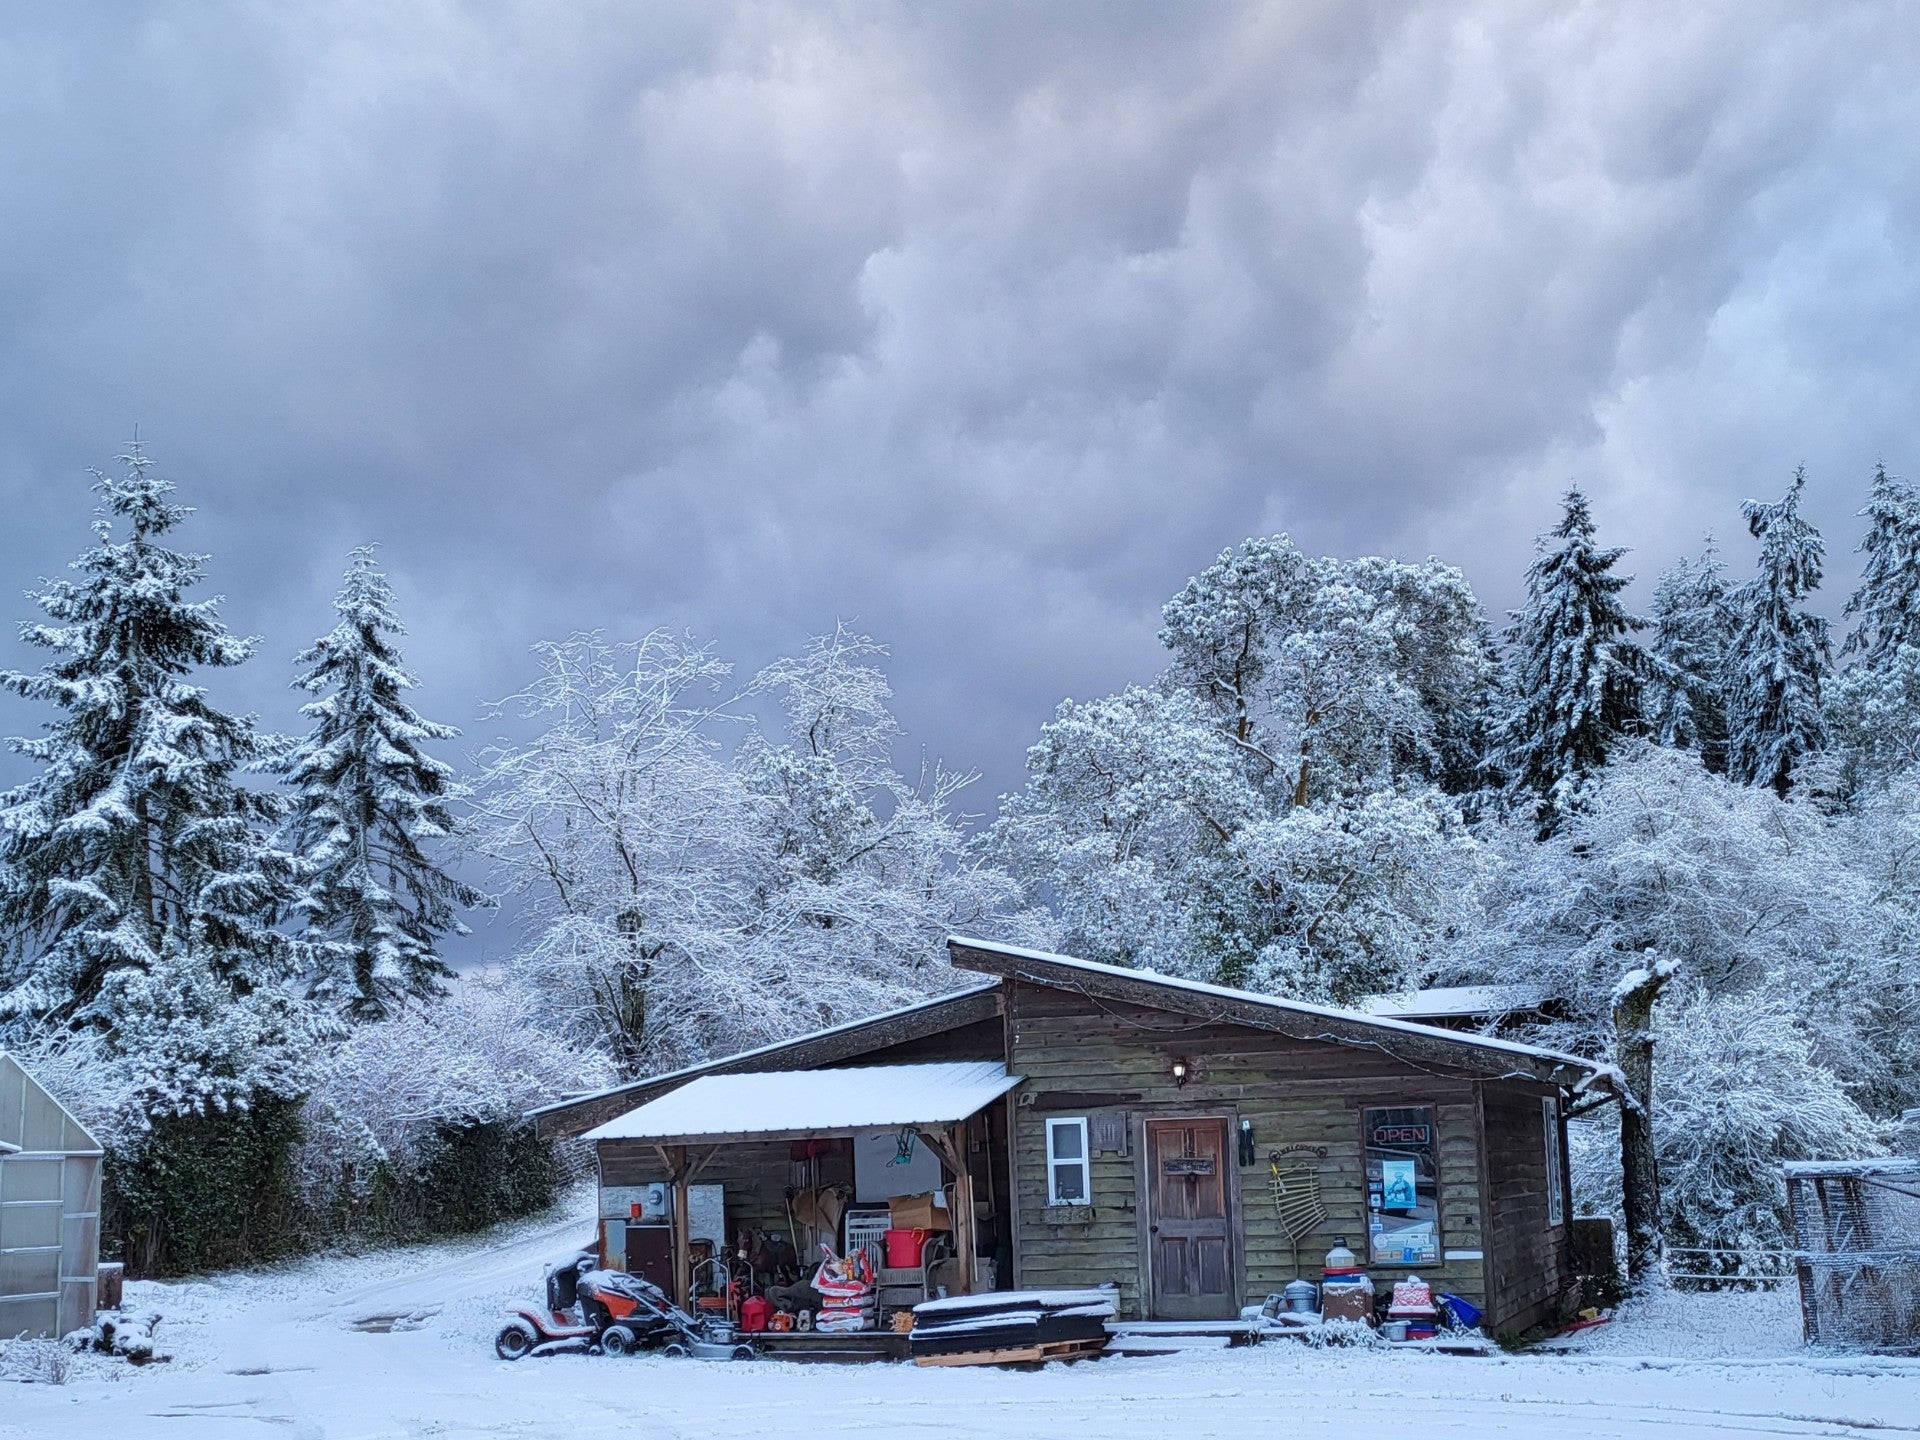 Photo in the winter, of a snow covered store on the Headley Holistics Farm. Beautiful 